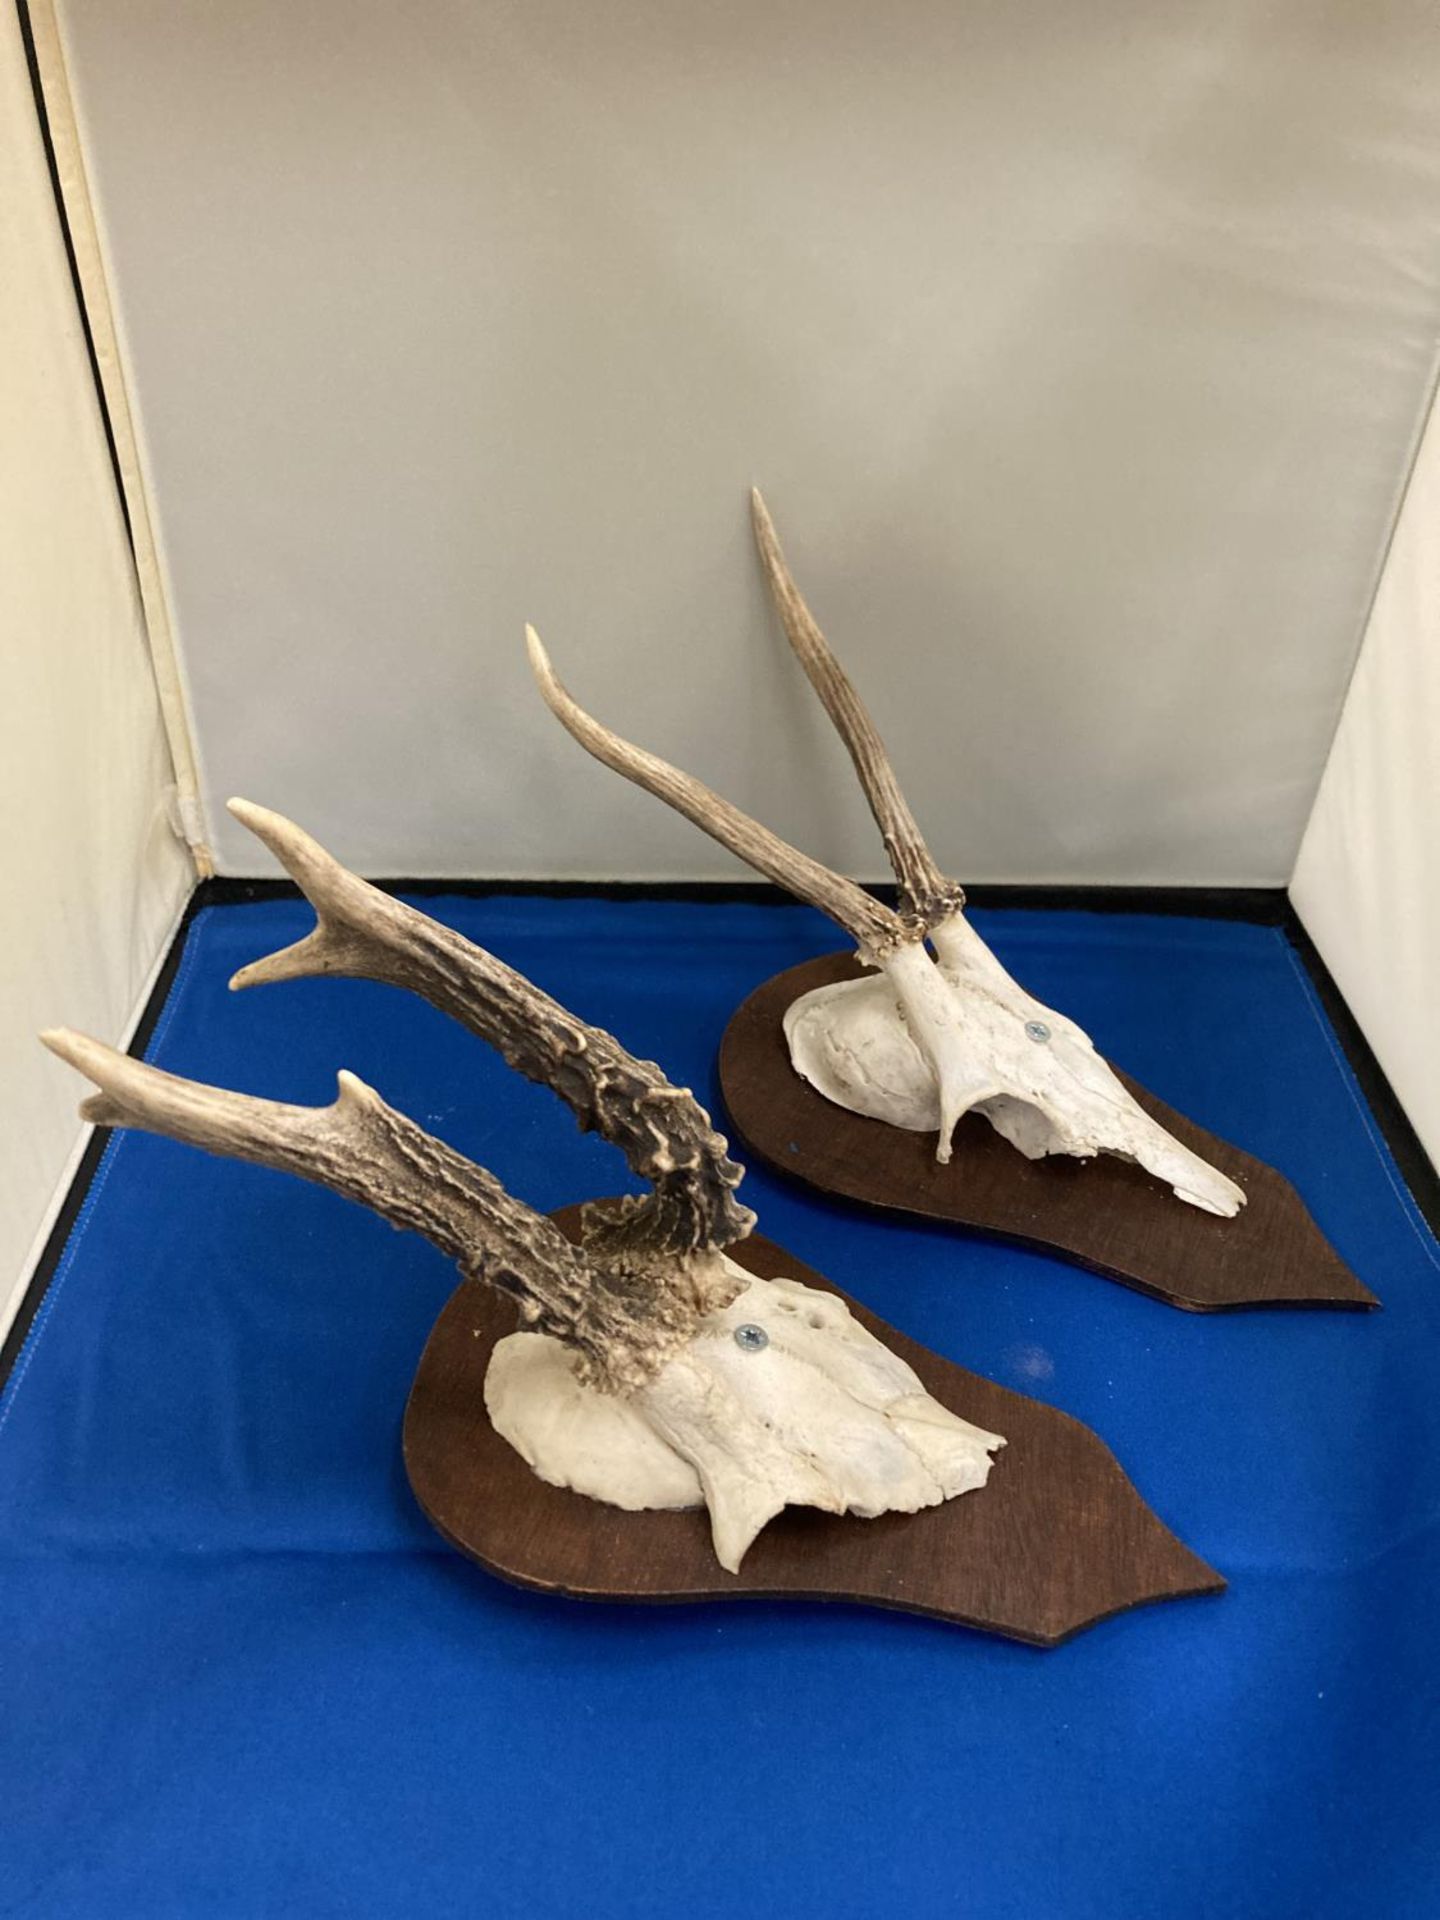 TWO SMALL SKULLS WITH ANTLERS MOUNTED ON SHIELD SHAPED PLINTHS - Image 2 of 2